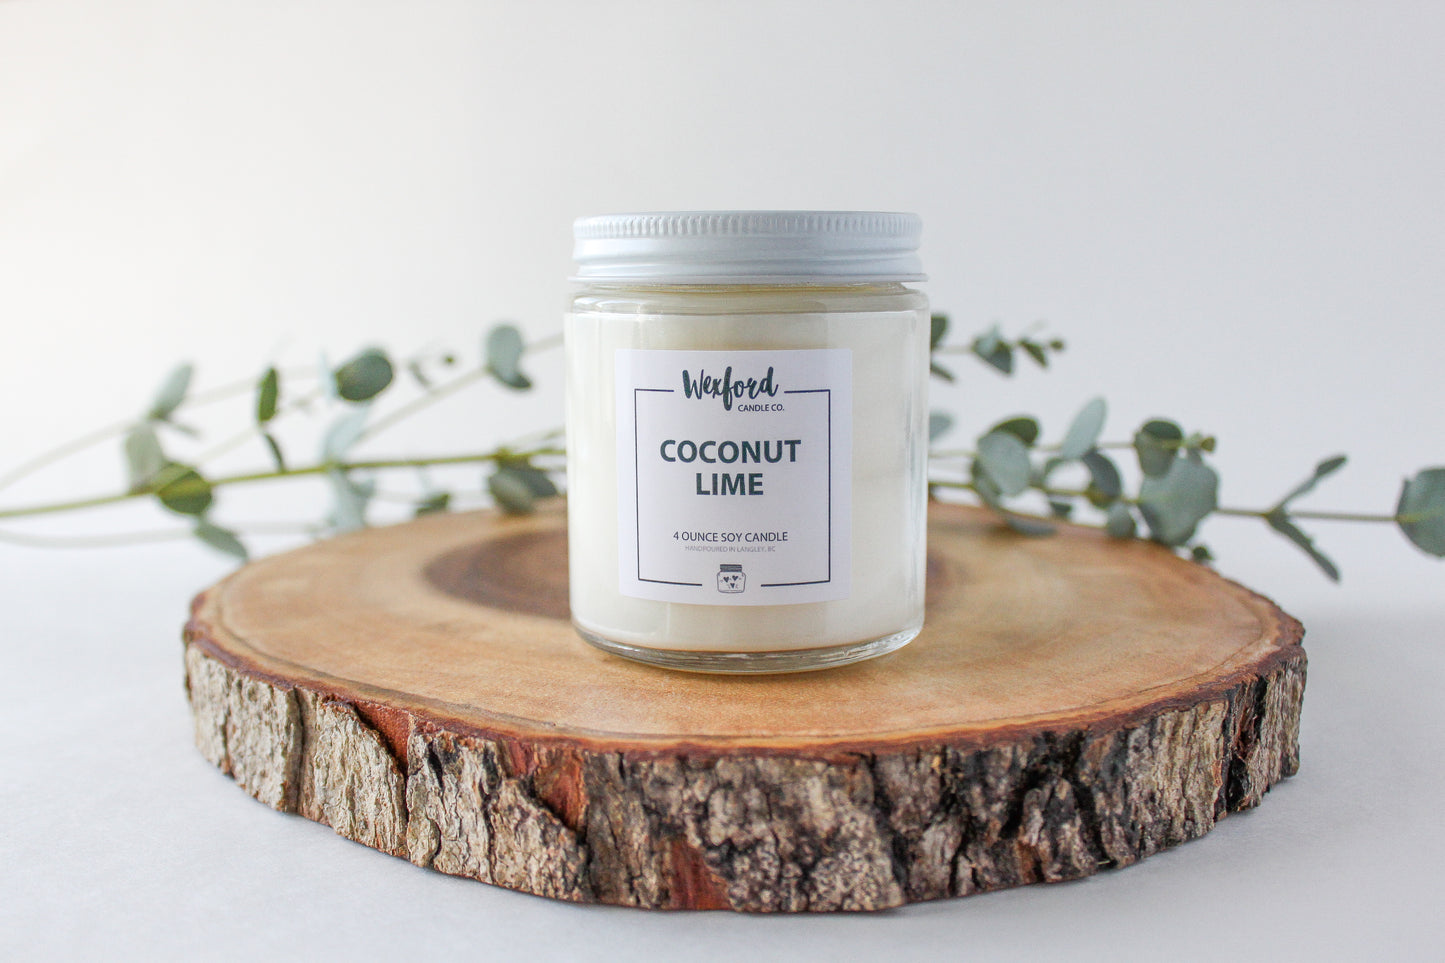 Coconut Lime Soy Candle - Wexford Candle Co.